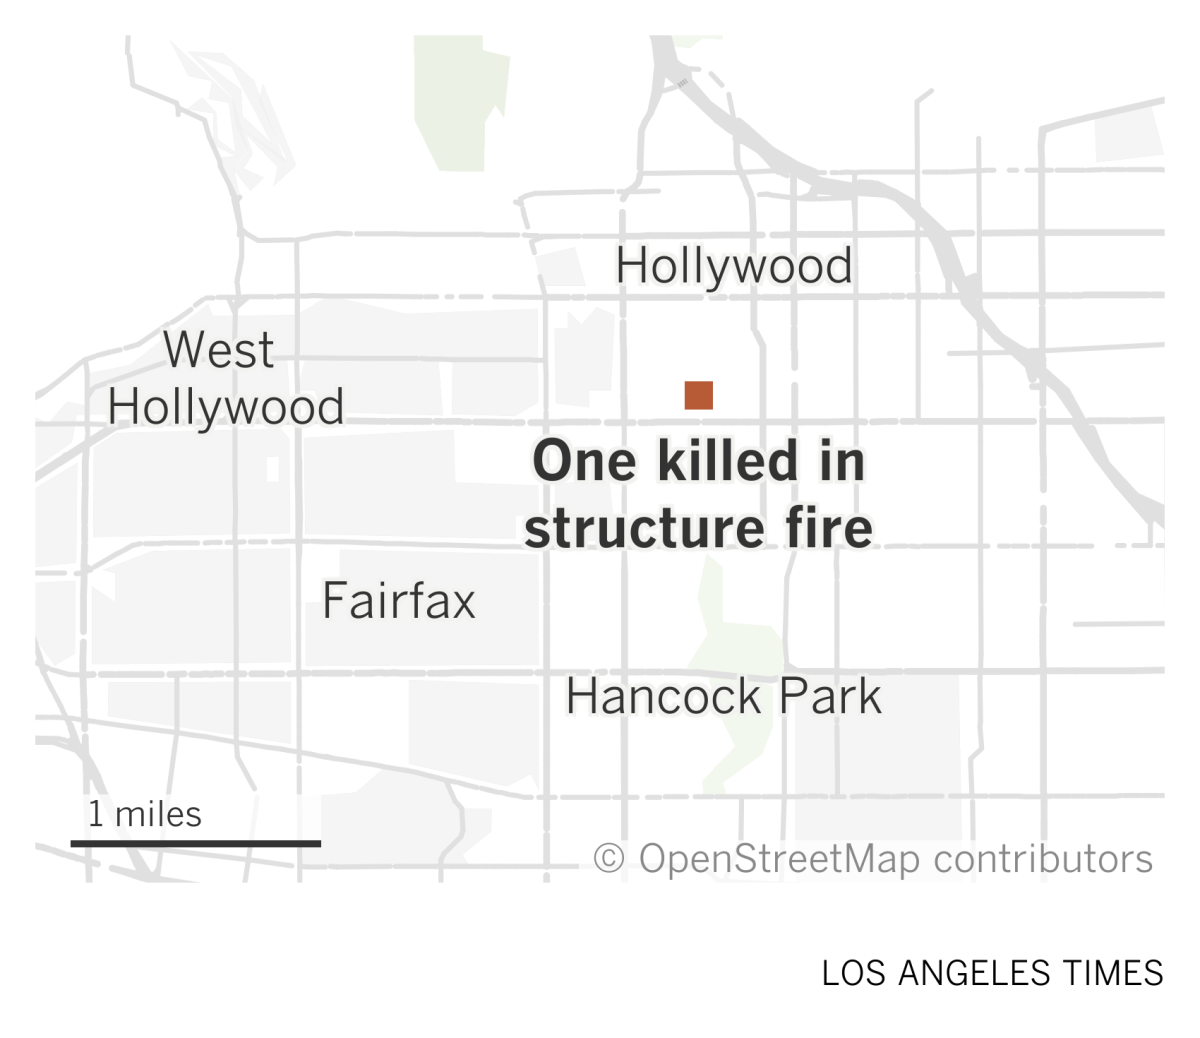 A map of central Los Angeles shows the location of a structure fire in Hollywood that left one person dead